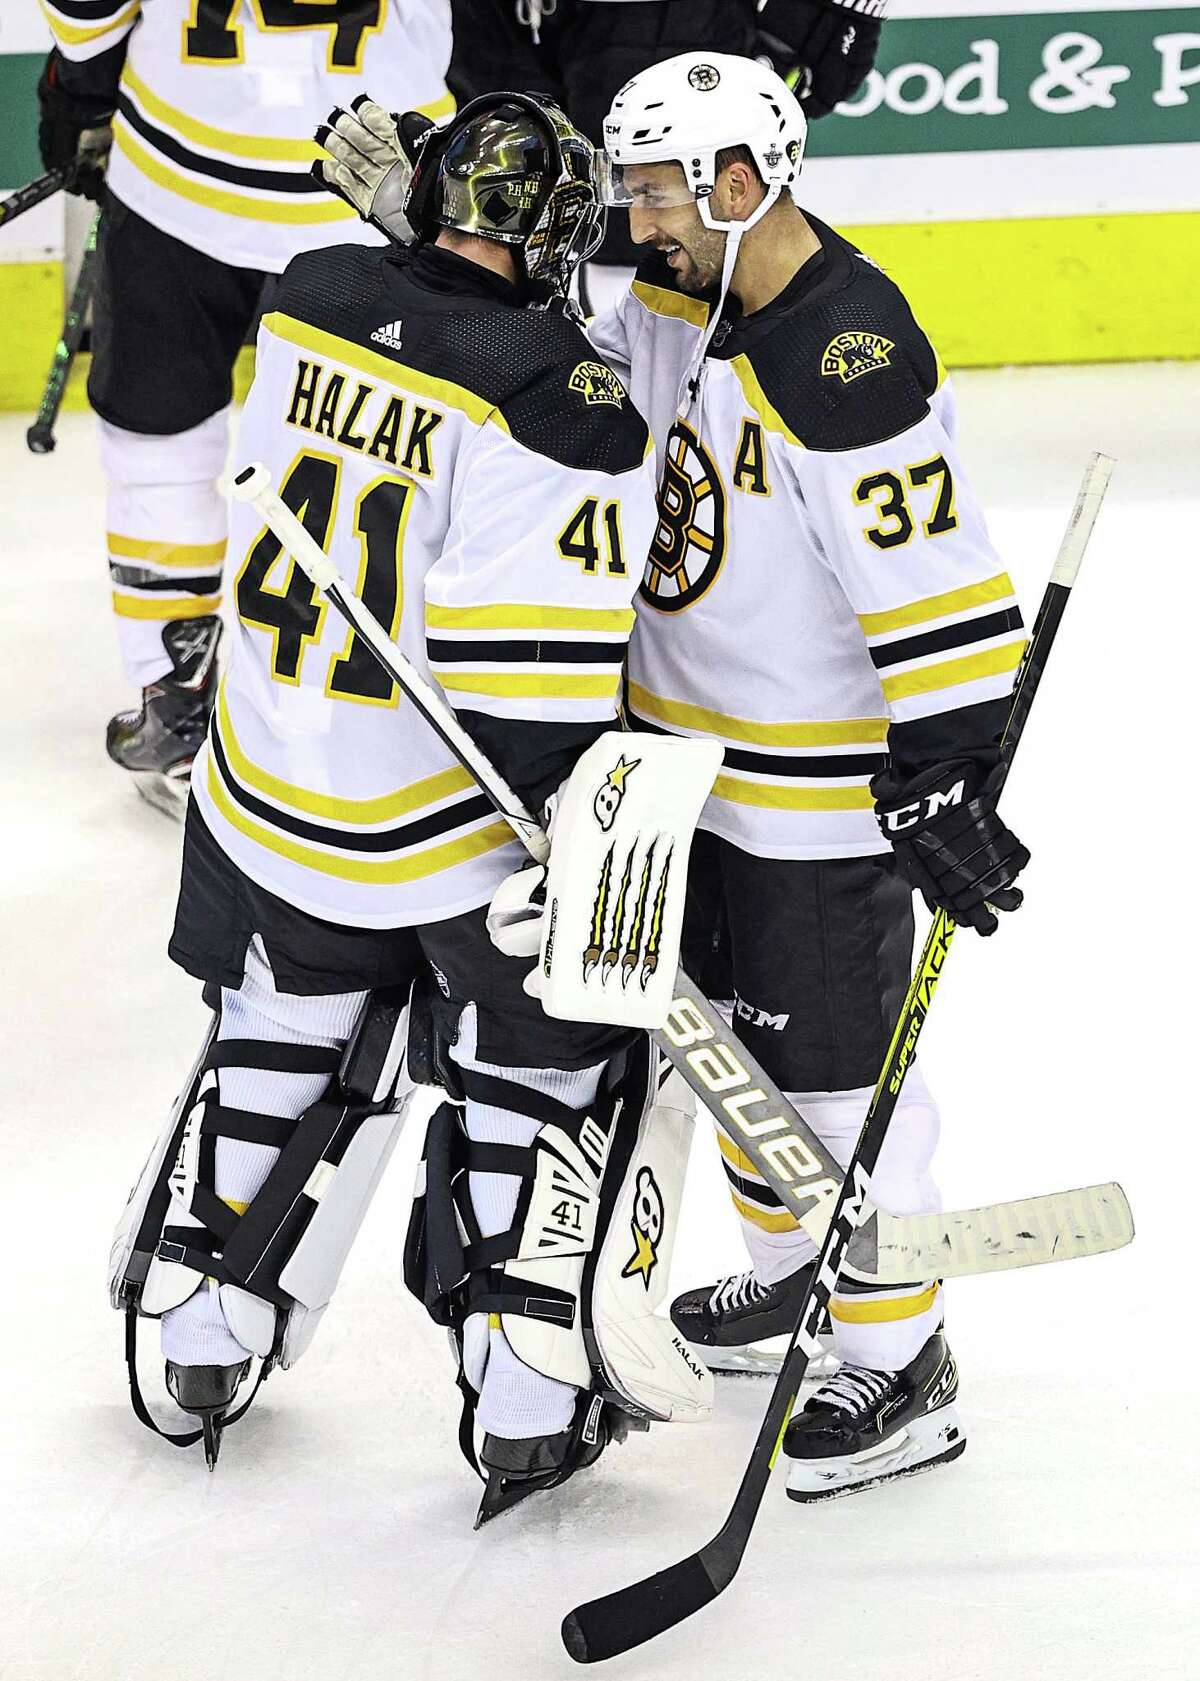 TORONTO, ONTARIO - AUGUST 15: Jaroslav Halak #41 and Patrice Bergeron #37 of the Boston Bruins celebrate their teams 3-1 win against the Carolina Hurricanes in Game Three of the Eastern Conference First Round during the 2020 NHL Stanley Cup Playoffs at Scotiabank Arena on August 15, 2020 in Toronto, Ontario. (Photo by Elsa/Getty Images)